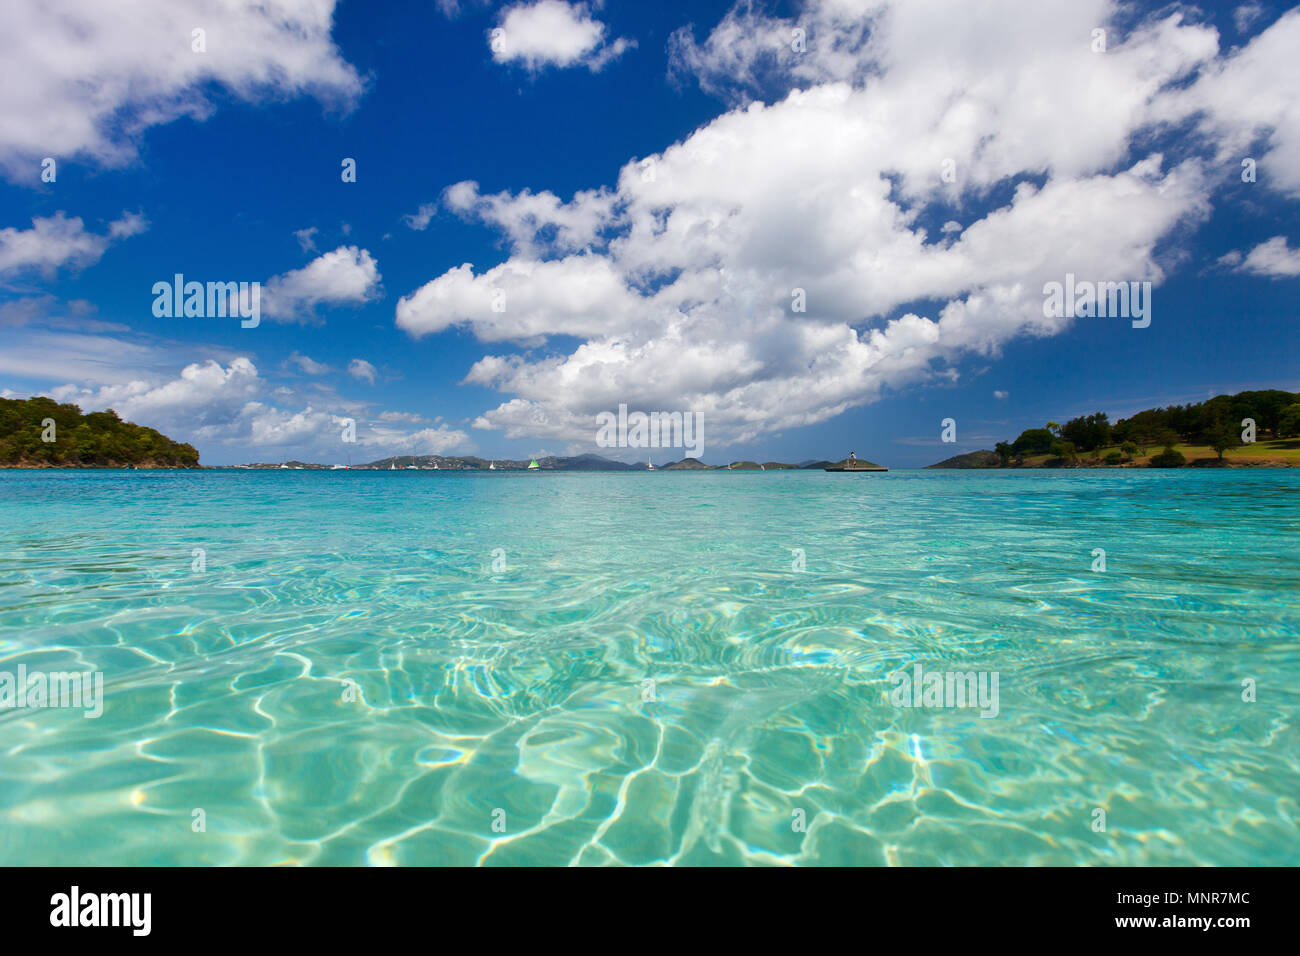 Beautiful tropical beach with white sand, turquoise ocean water and blue sky at St John, US Virgin Islands in Caribbean Stock Photo